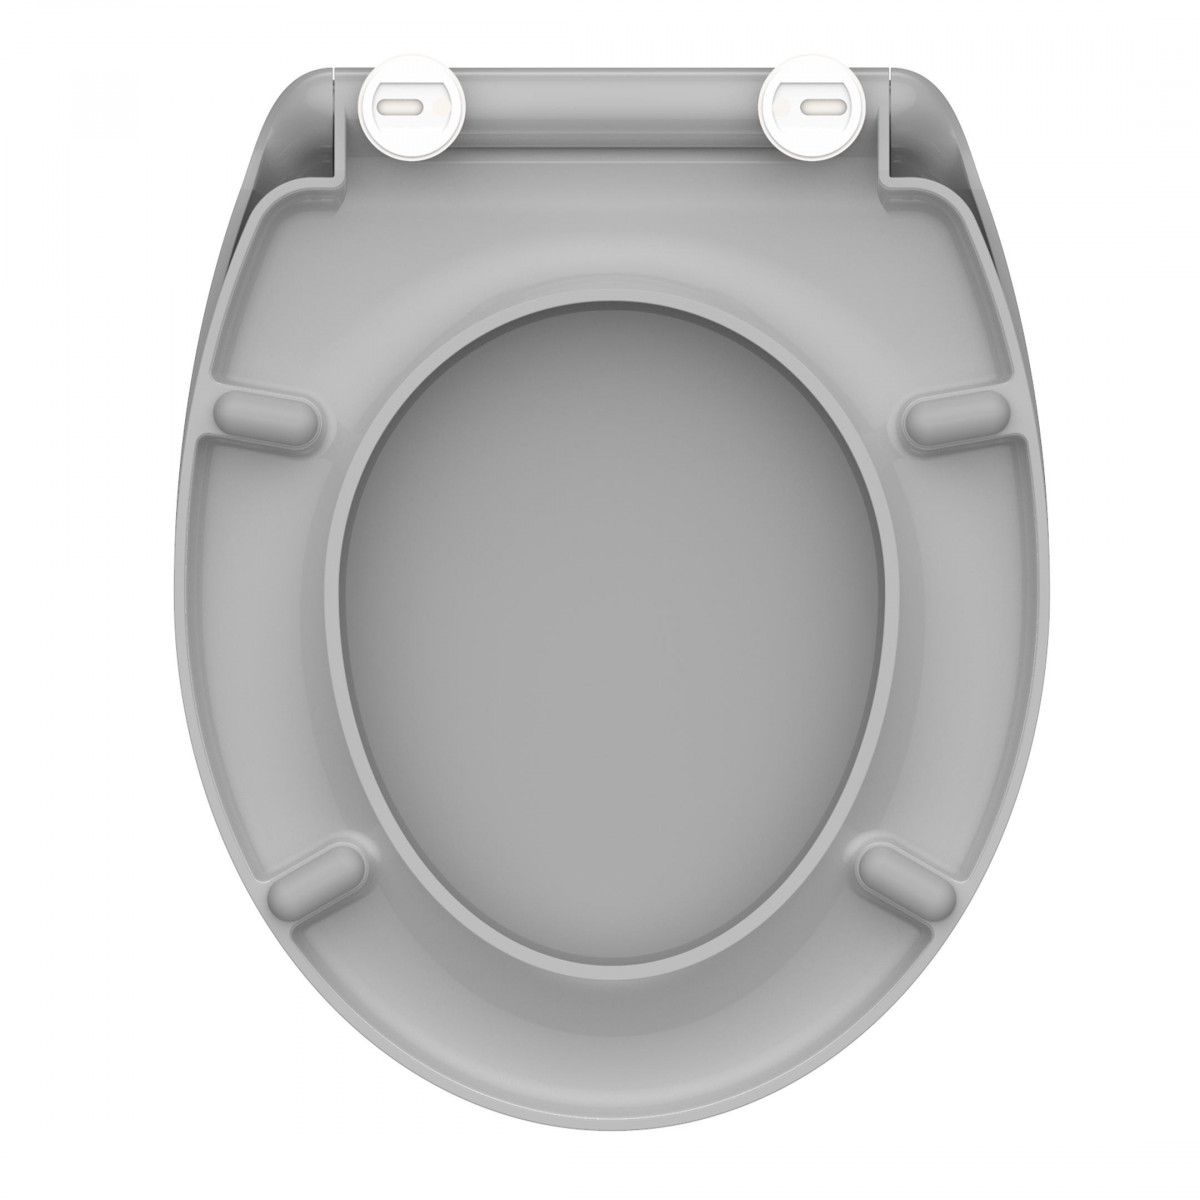 Duroplast Toilet Seat GREY with Soft Close and Quick Release